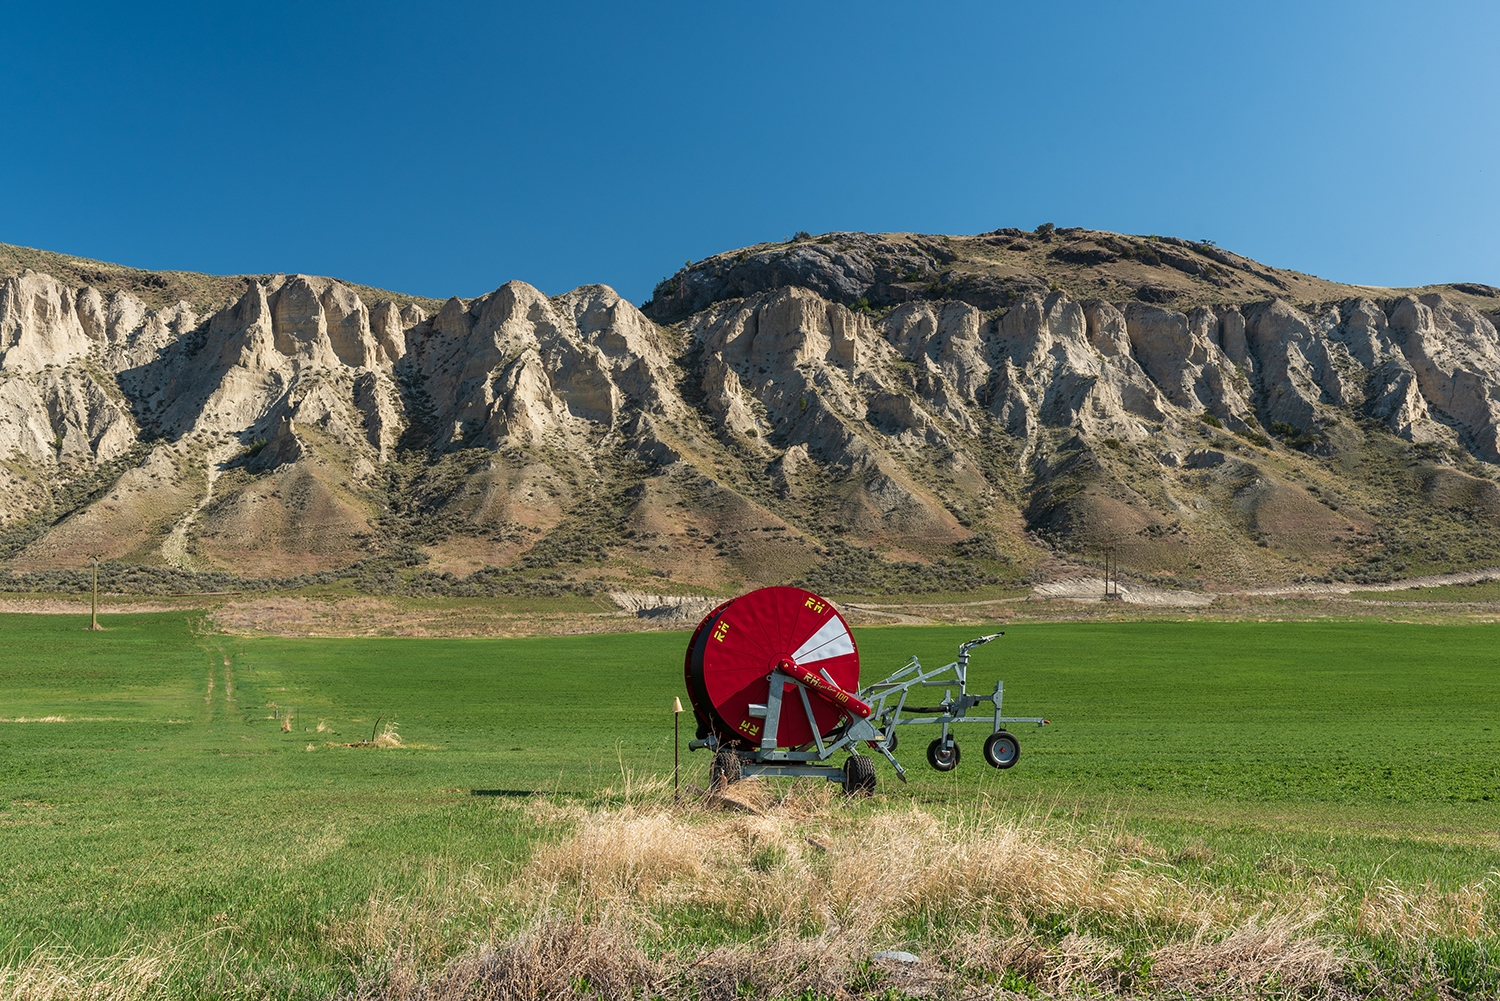 Kamloops rural life with mountains and red machine with straw